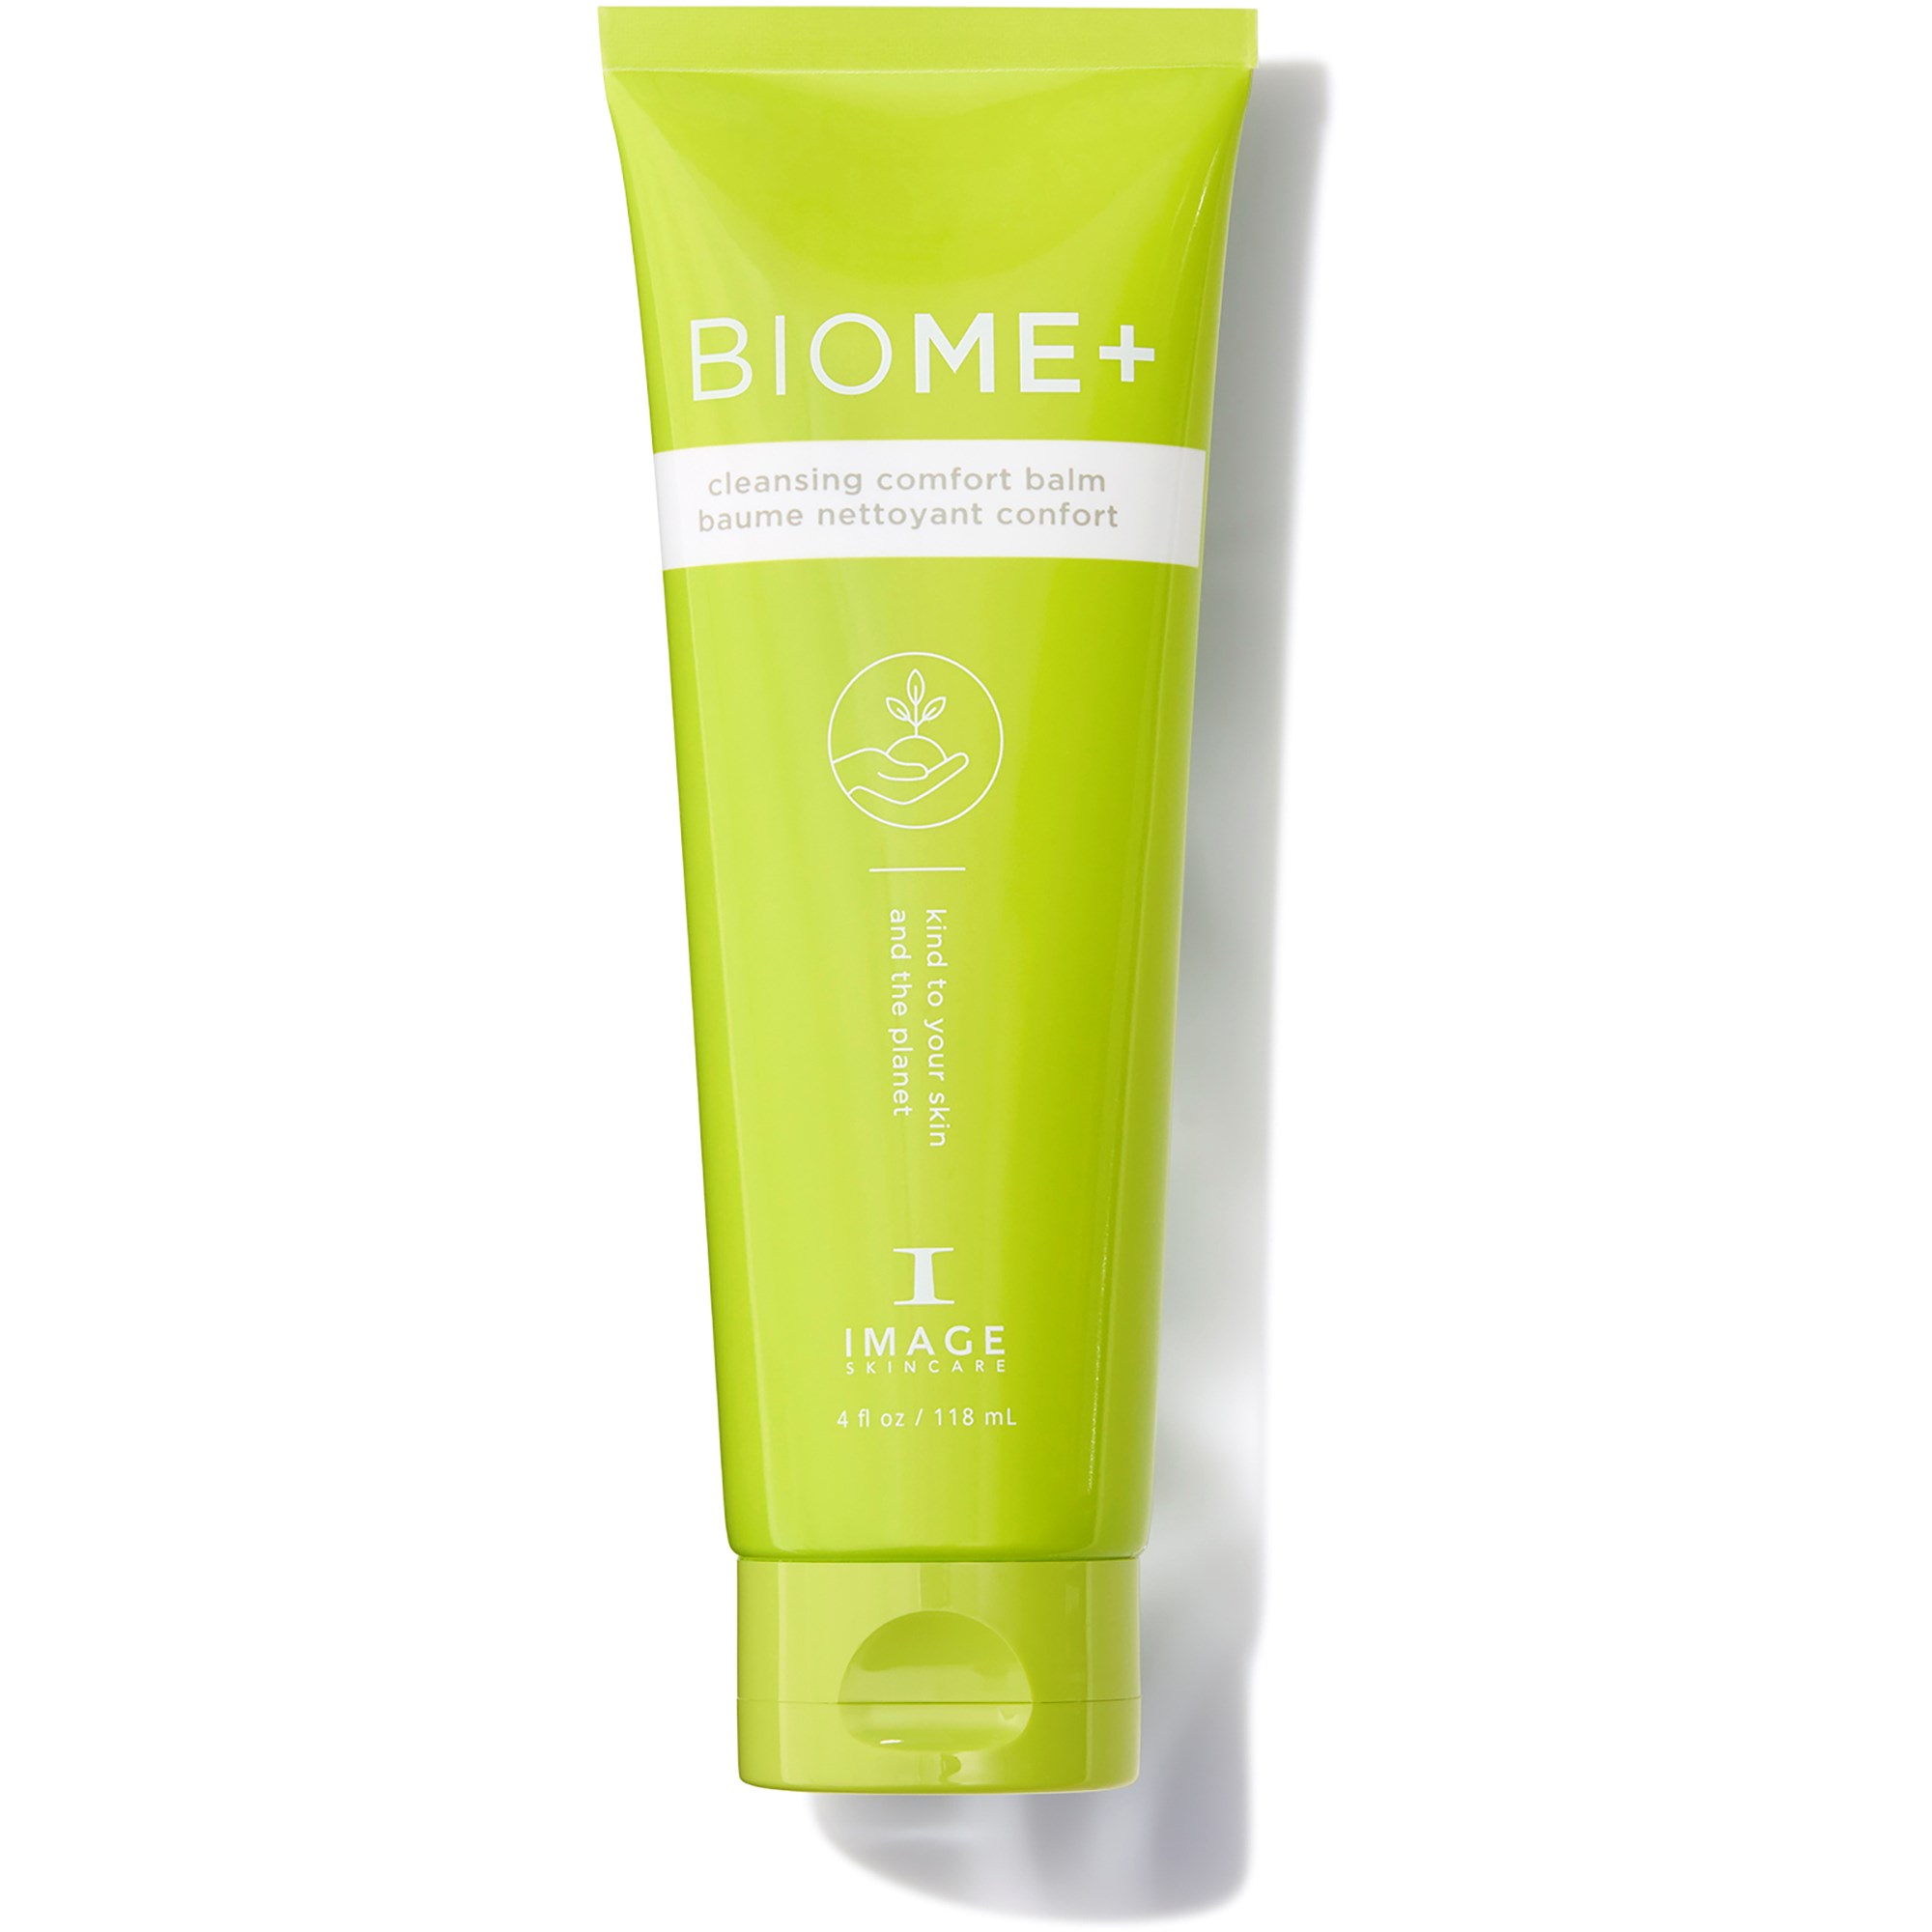 IMAGE Skincare Biome+ Cleansing Comfort Balm 118 ml